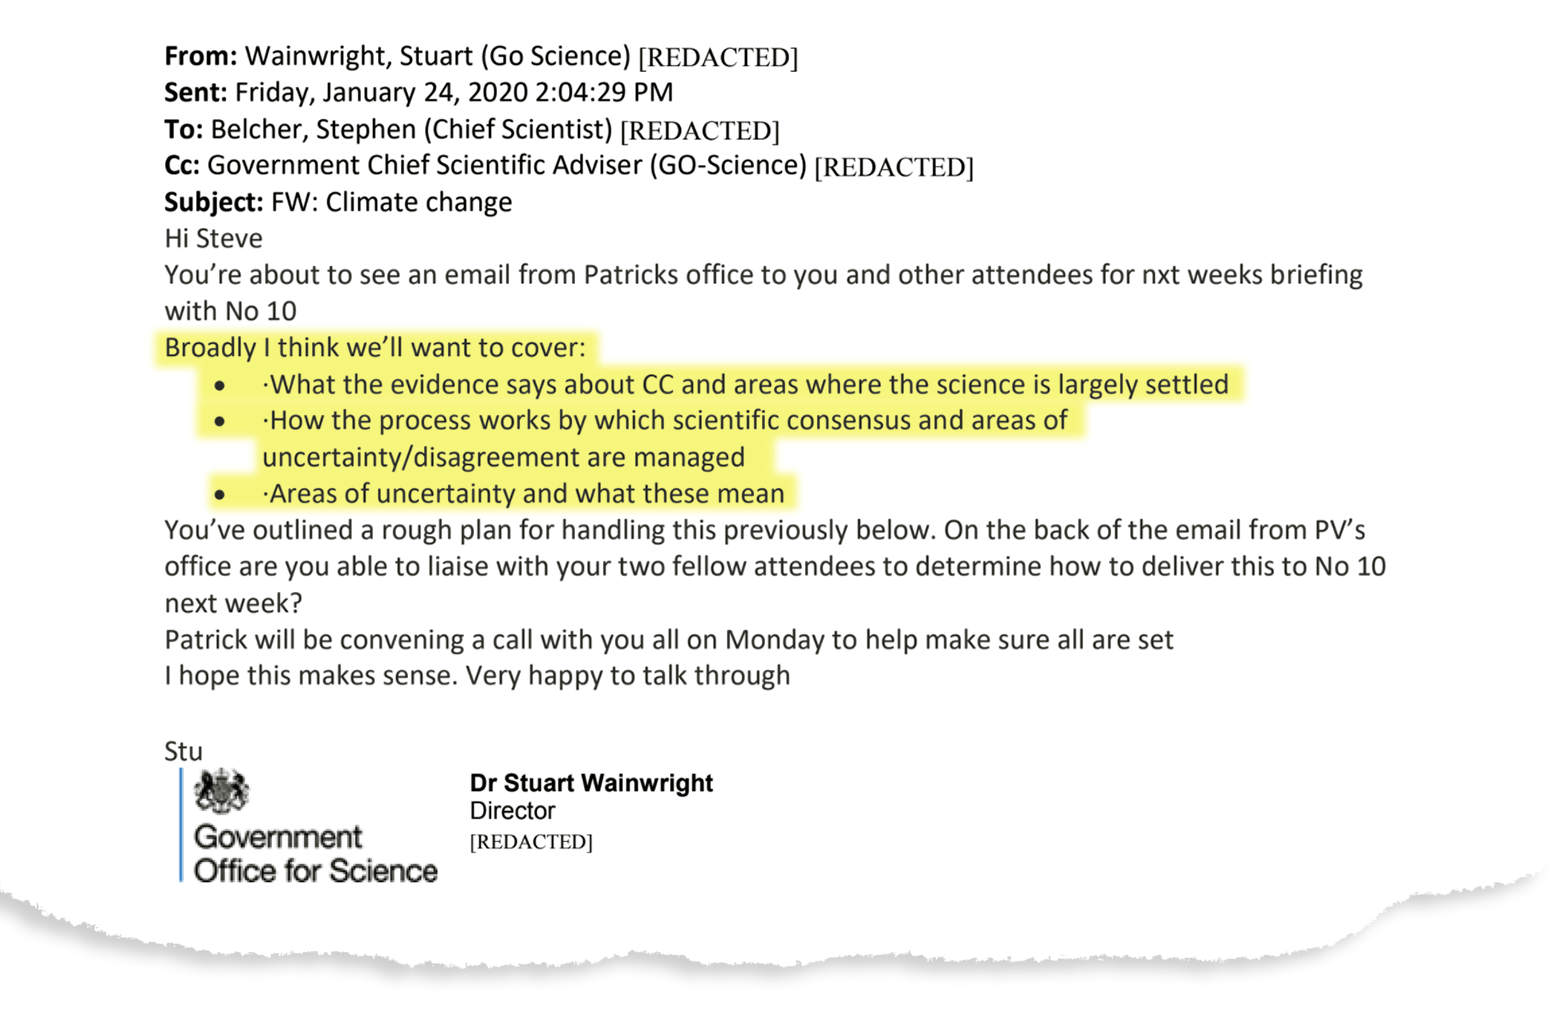 Email outlining what scientists wanted to cover in the no10 climate change teach-in